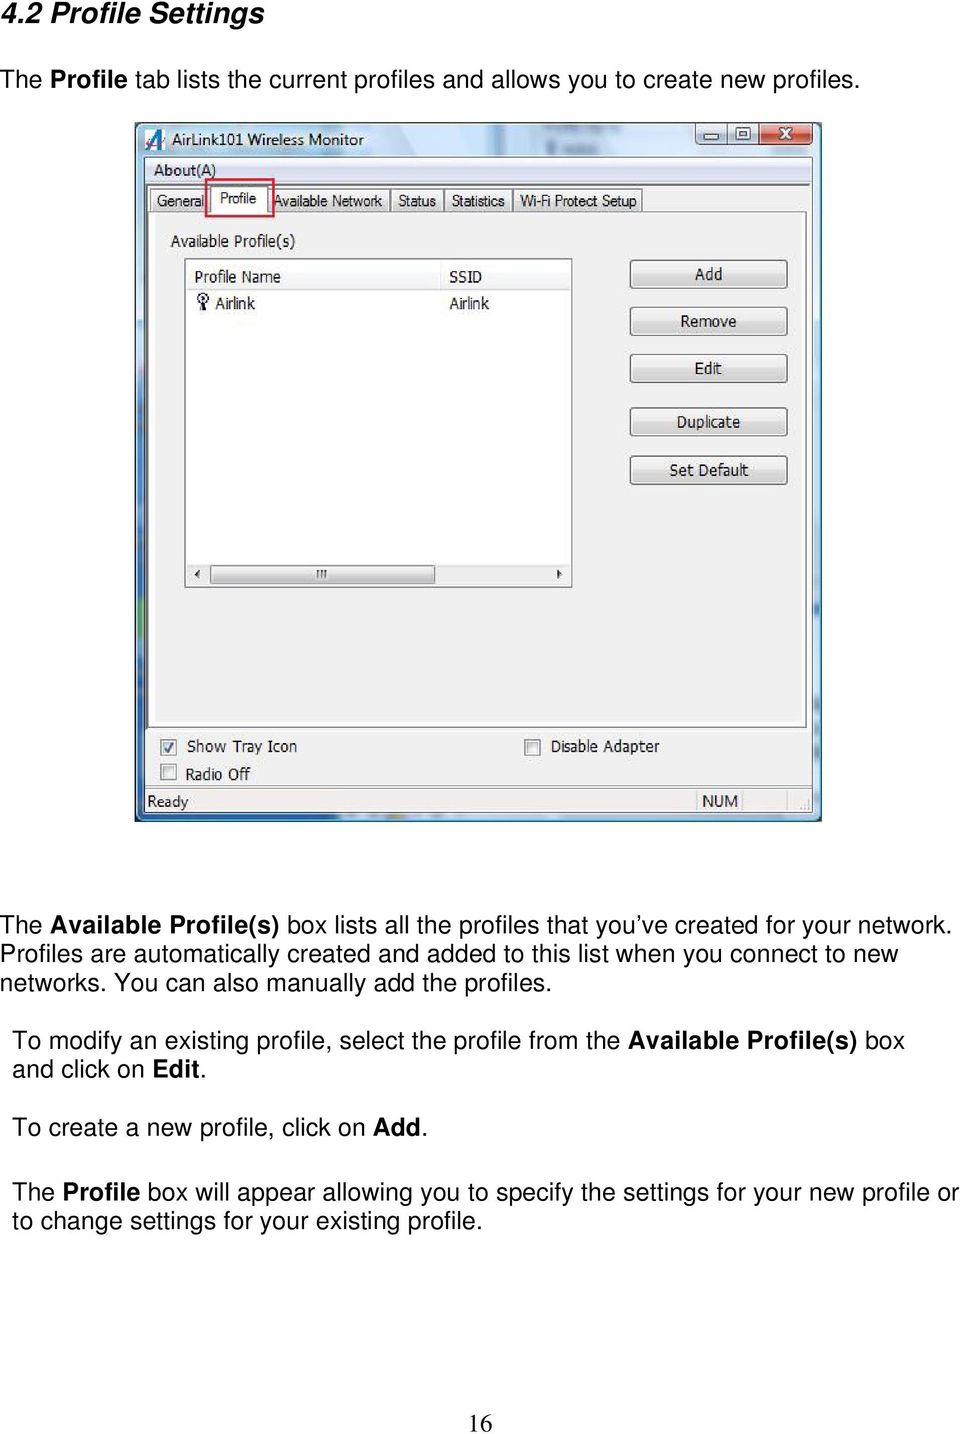 Profiles are automatically created and added to this list when you connect to new networks. You can also manually add the profiles.